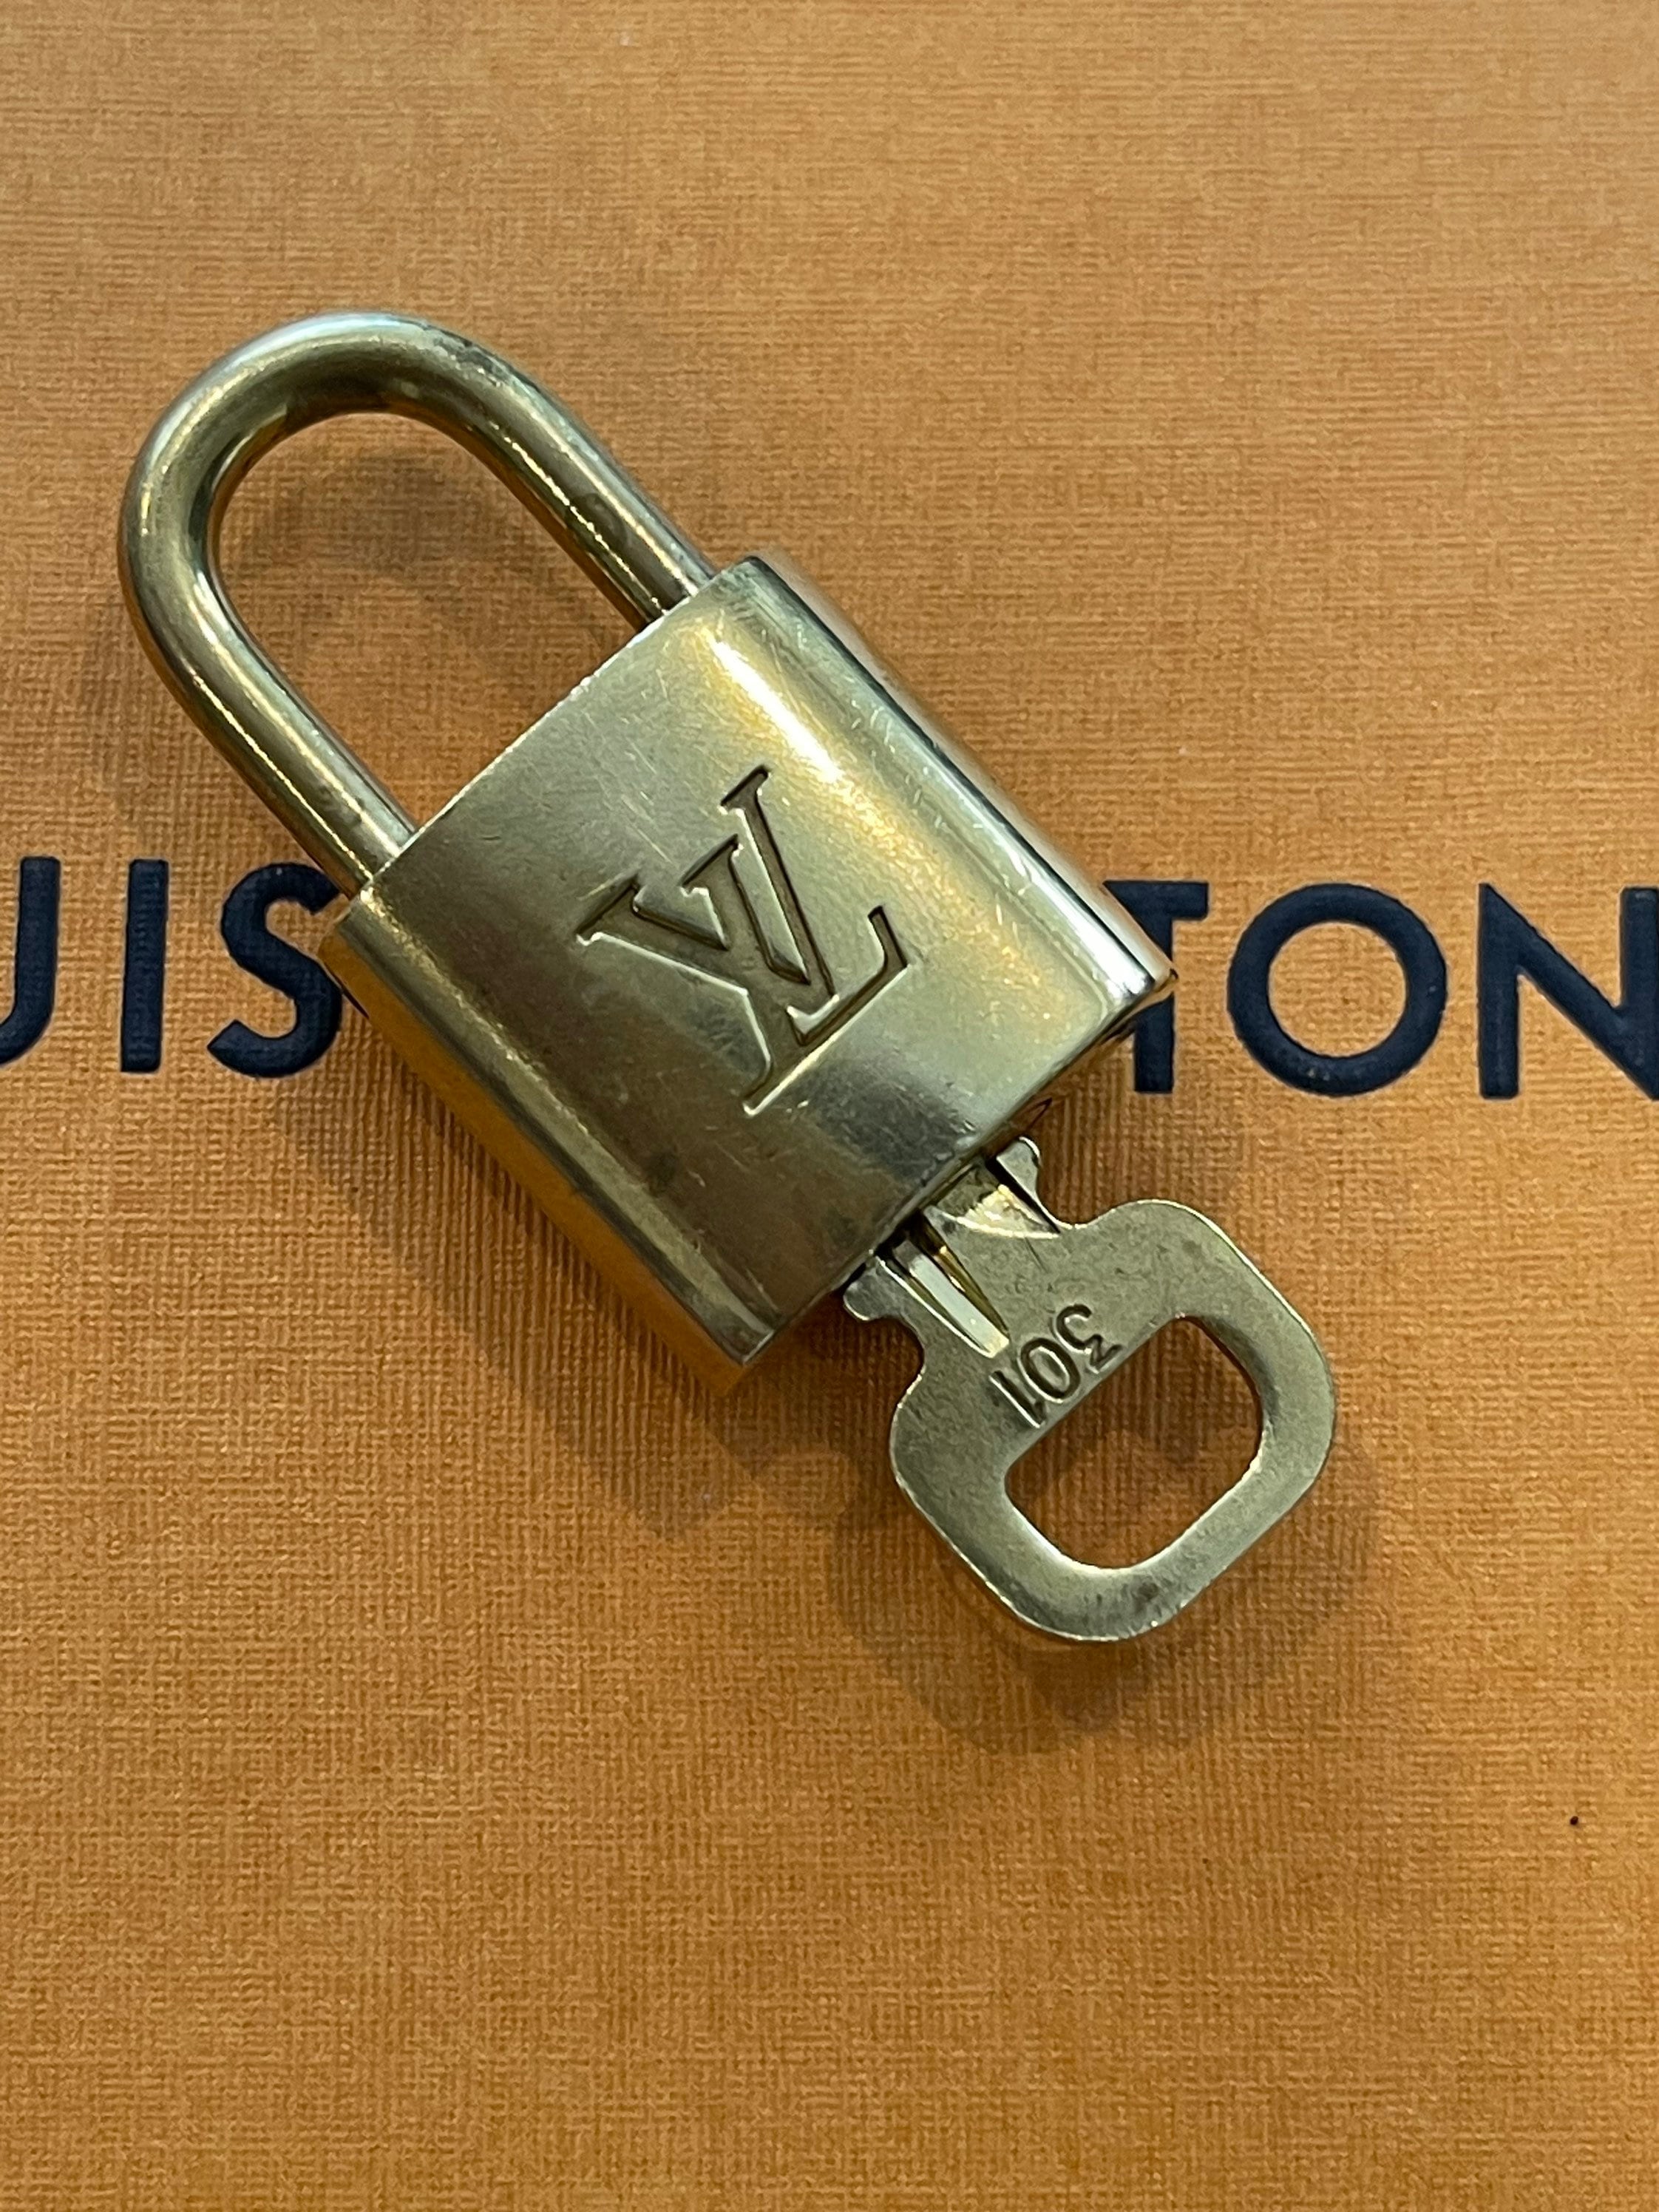 LOUIS VUITTON AUTH BRASS LOCK KEY PADLOCK- POLISHED! Fits all bags! MANY  #'s